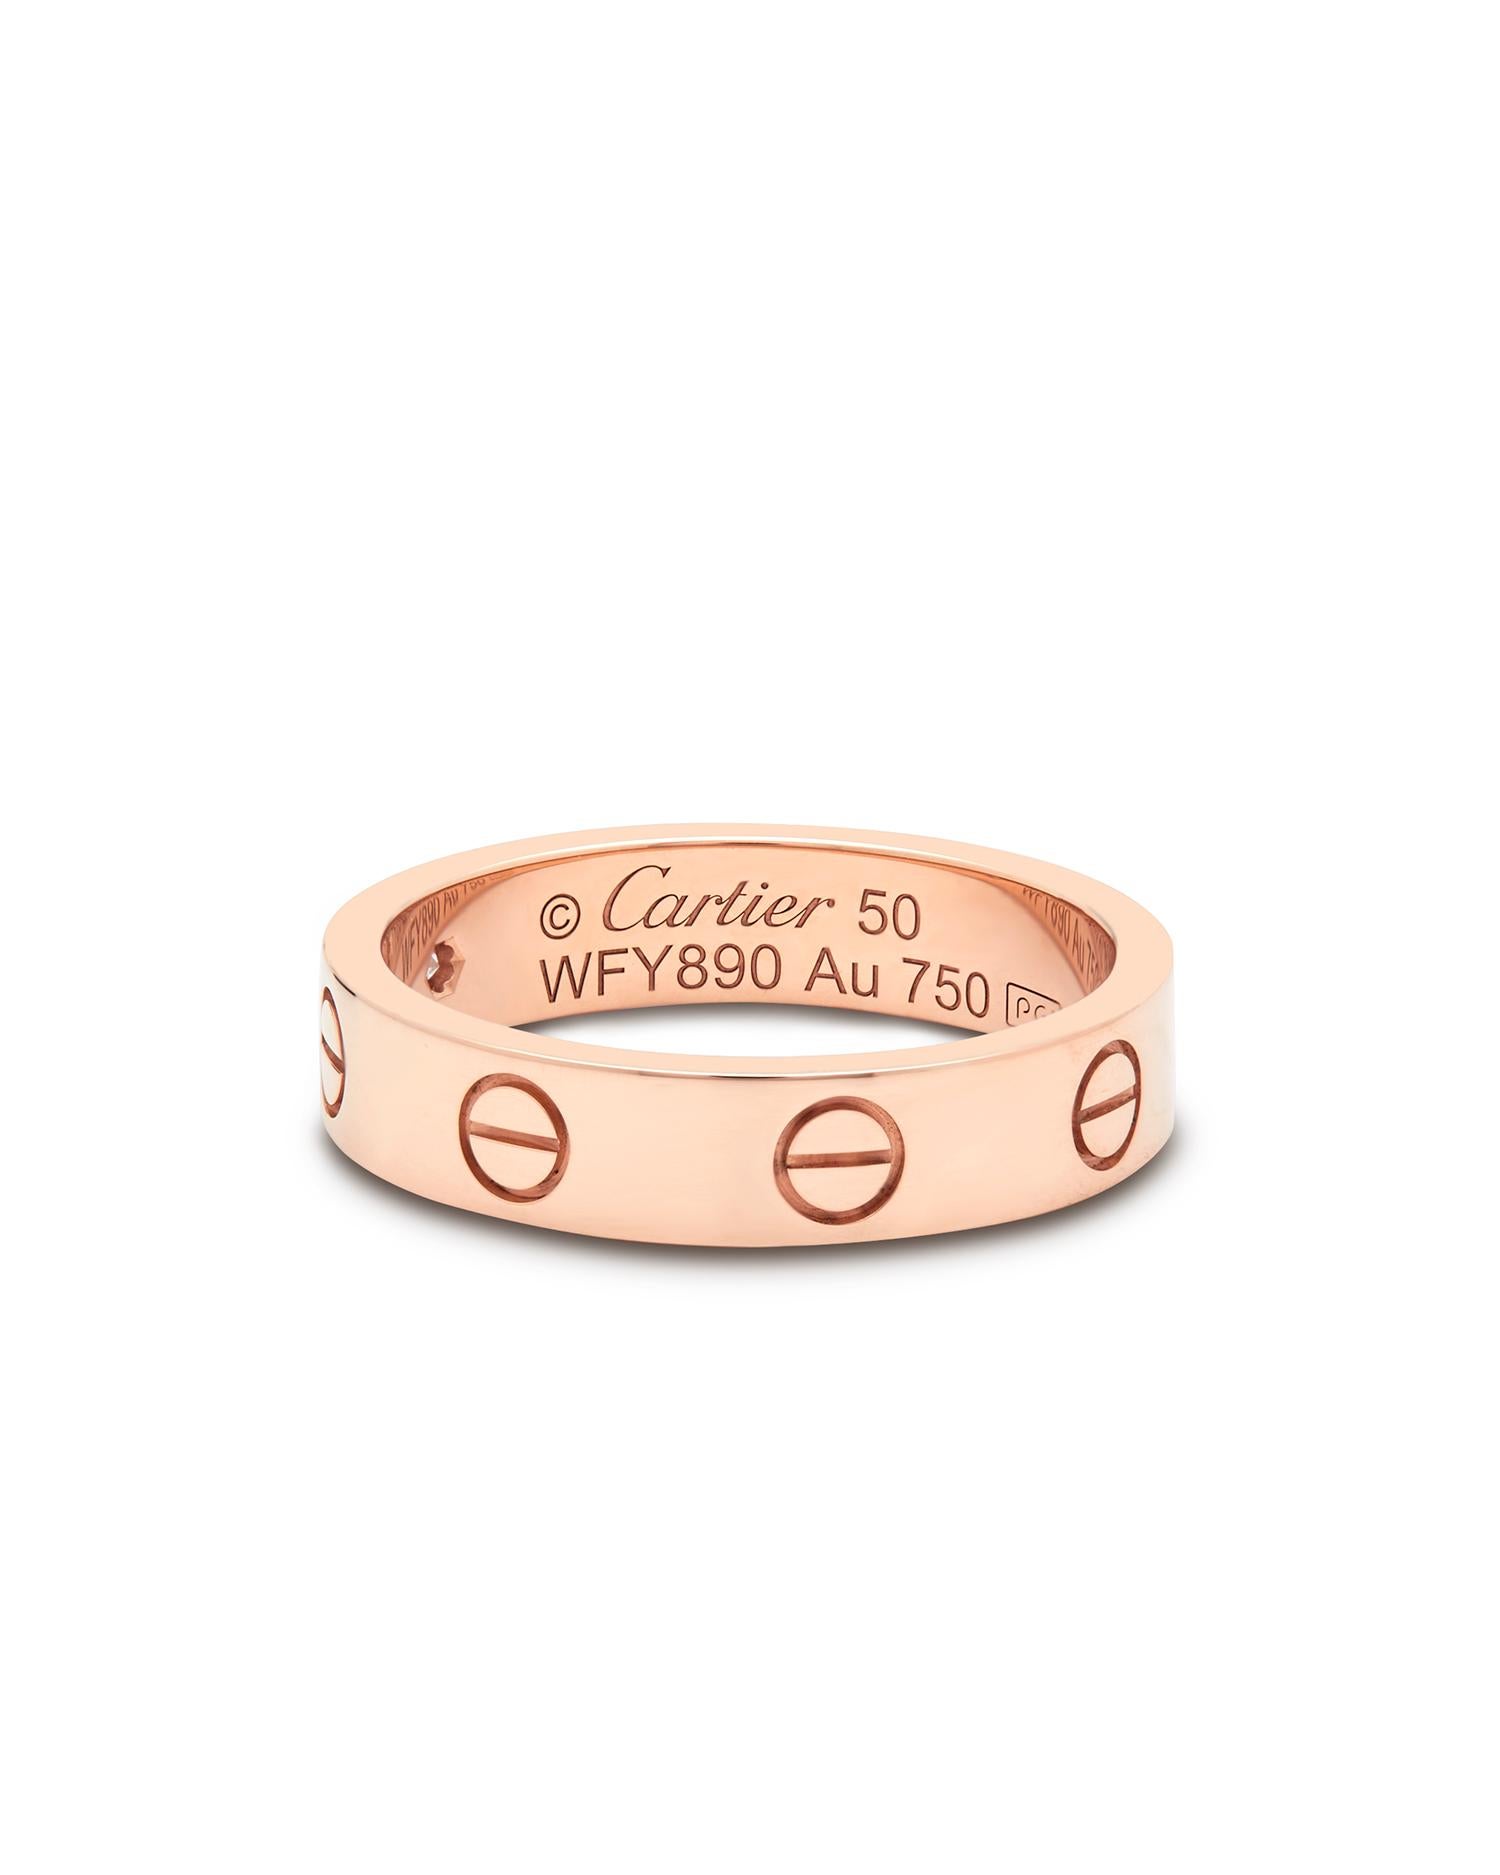 Cartier rose gold Diamond Love ring.

This iconic Love ring set with a single diamond representing your Love in one beautiful ring. This ring is set in rose gold with 1 single diamond, 0.02ct.

Signed Cartier
Purchased in Jan 2024
Stamped 750
Model